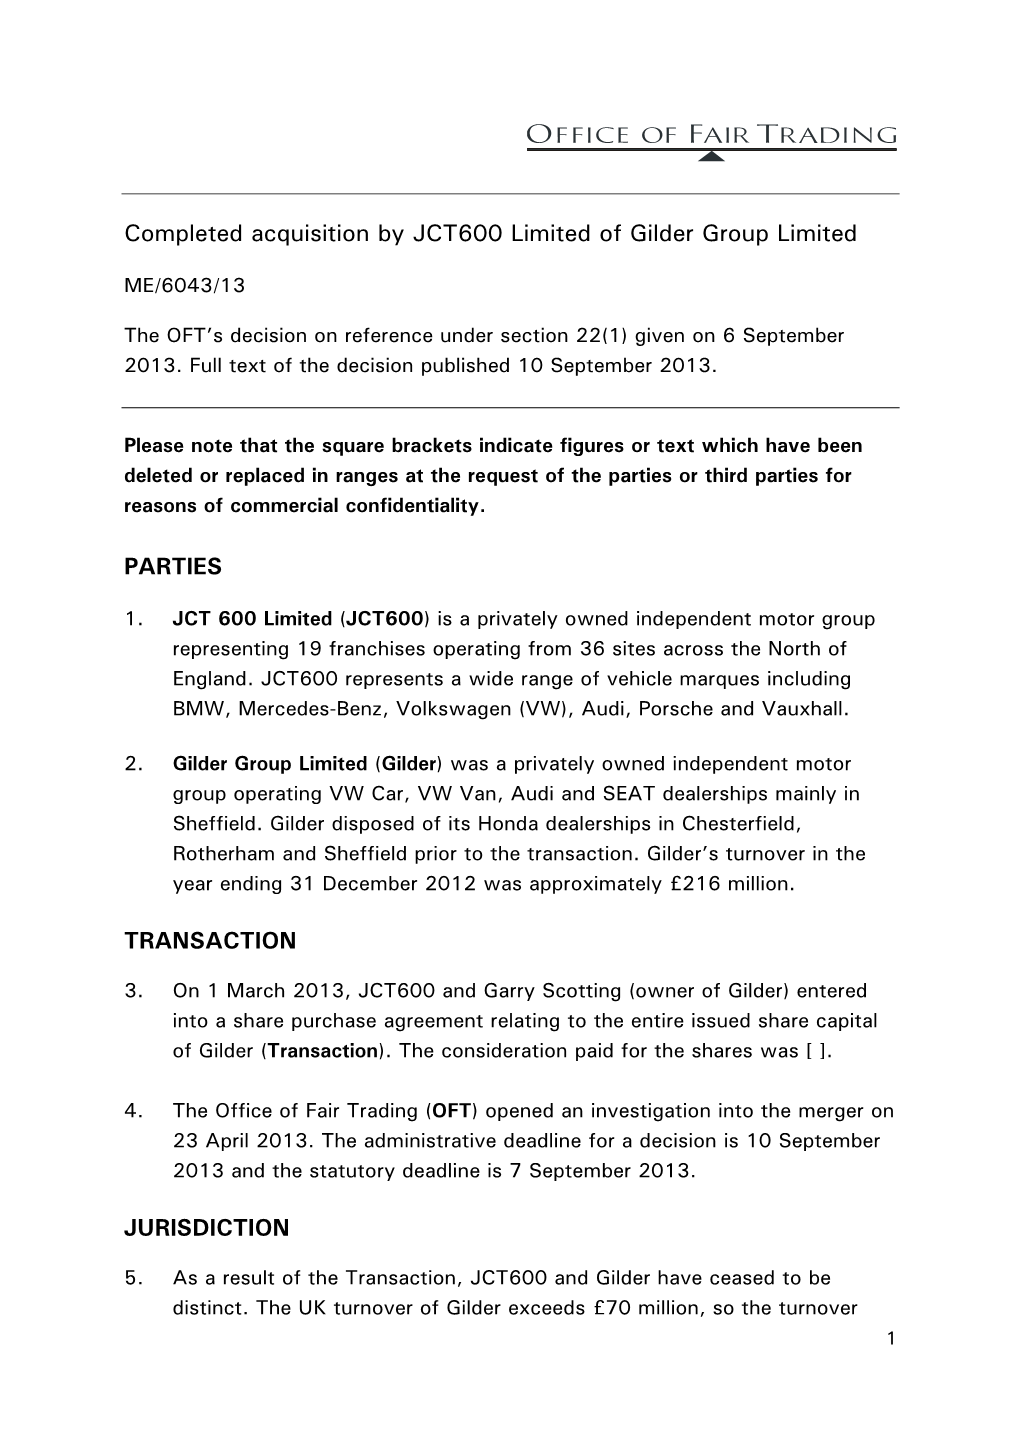 Full Text of the Decision Regarding the Completed Acquisition by JCT600 Limited of Gilder Group Limited